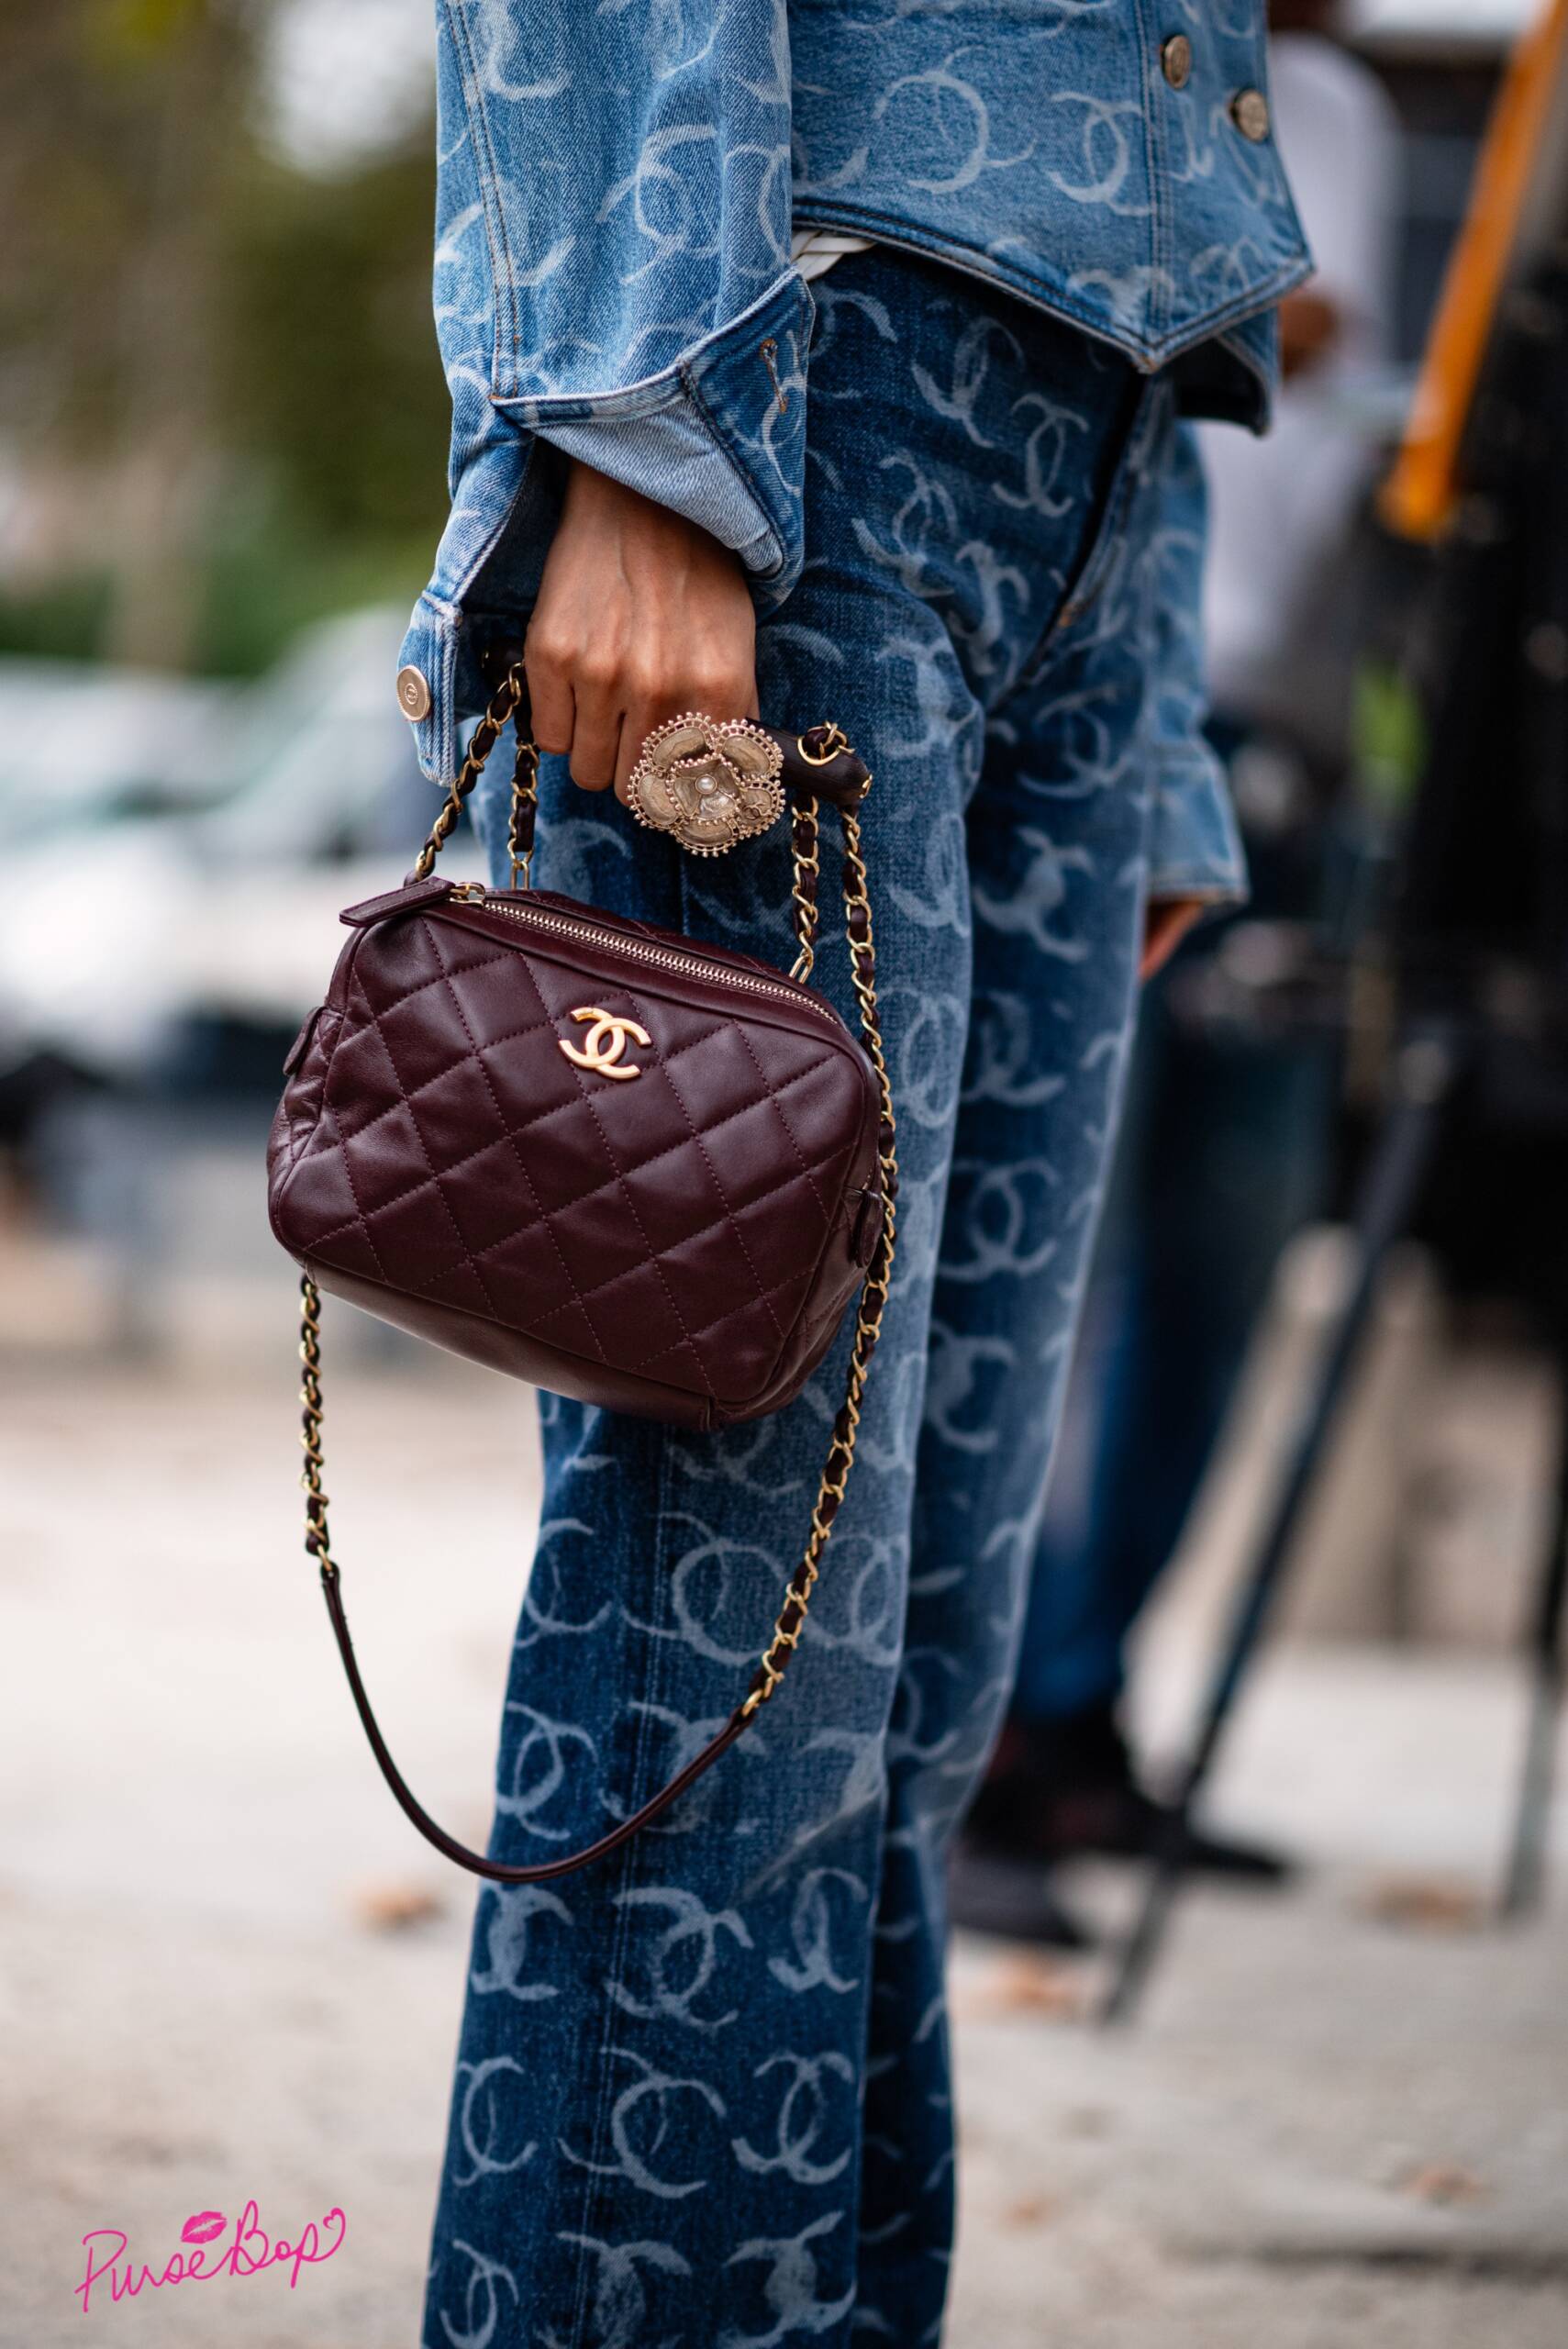 How much do Chanel handbags cost in Paris, France? Do they offer a discount  if we buy multiple bags at once? - Quora